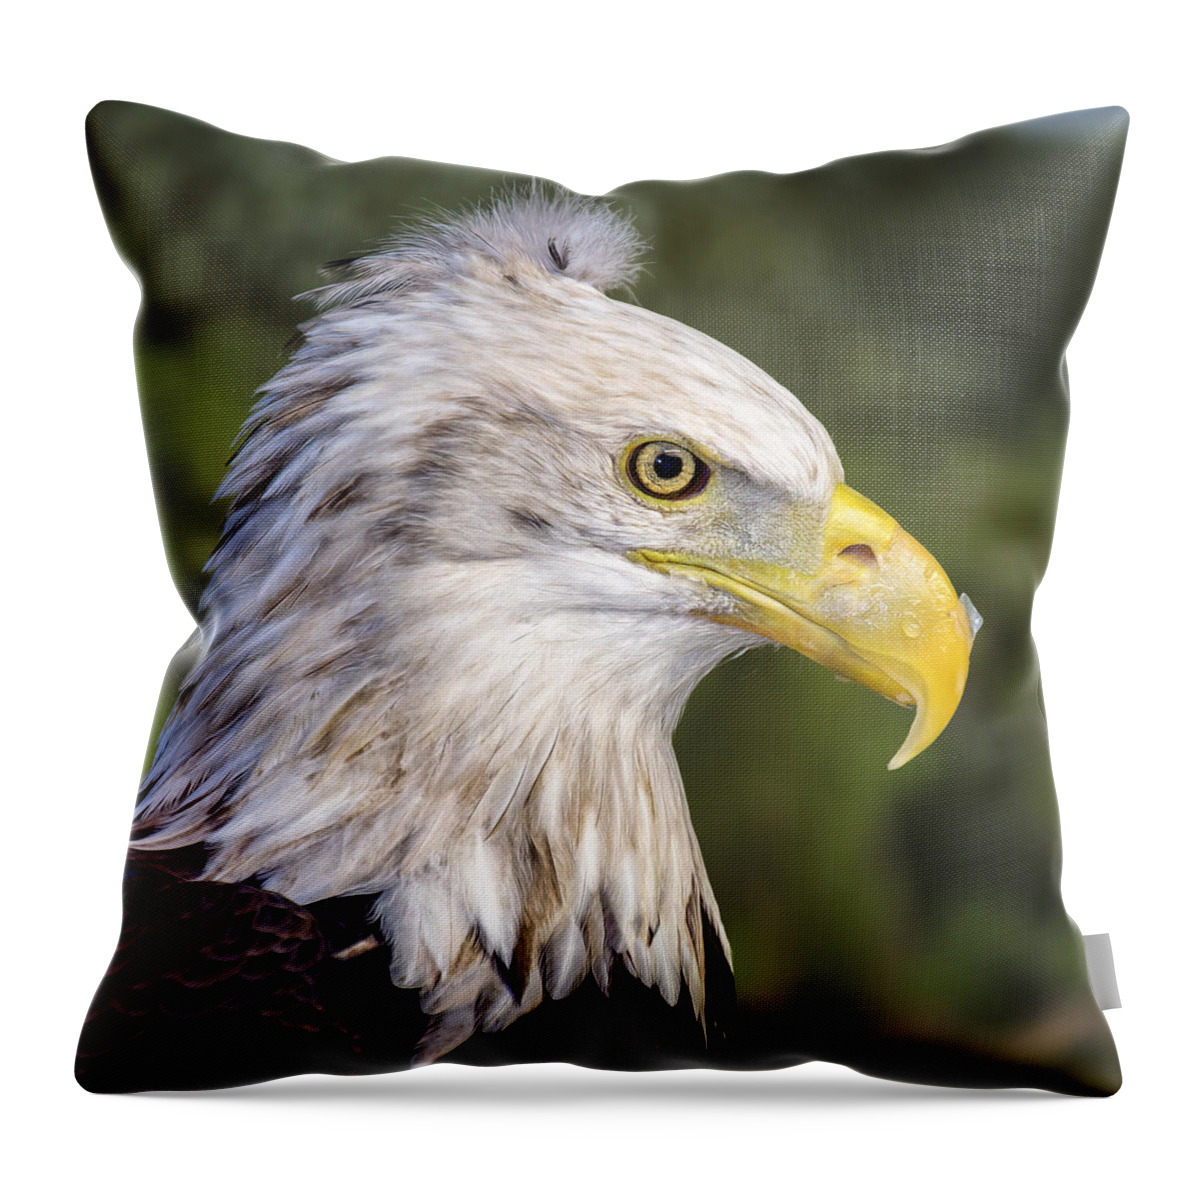 Bald Eagle Throw Pillow featuring the photograph Baldy Needs A Comb by Bill and Linda Tiepelman